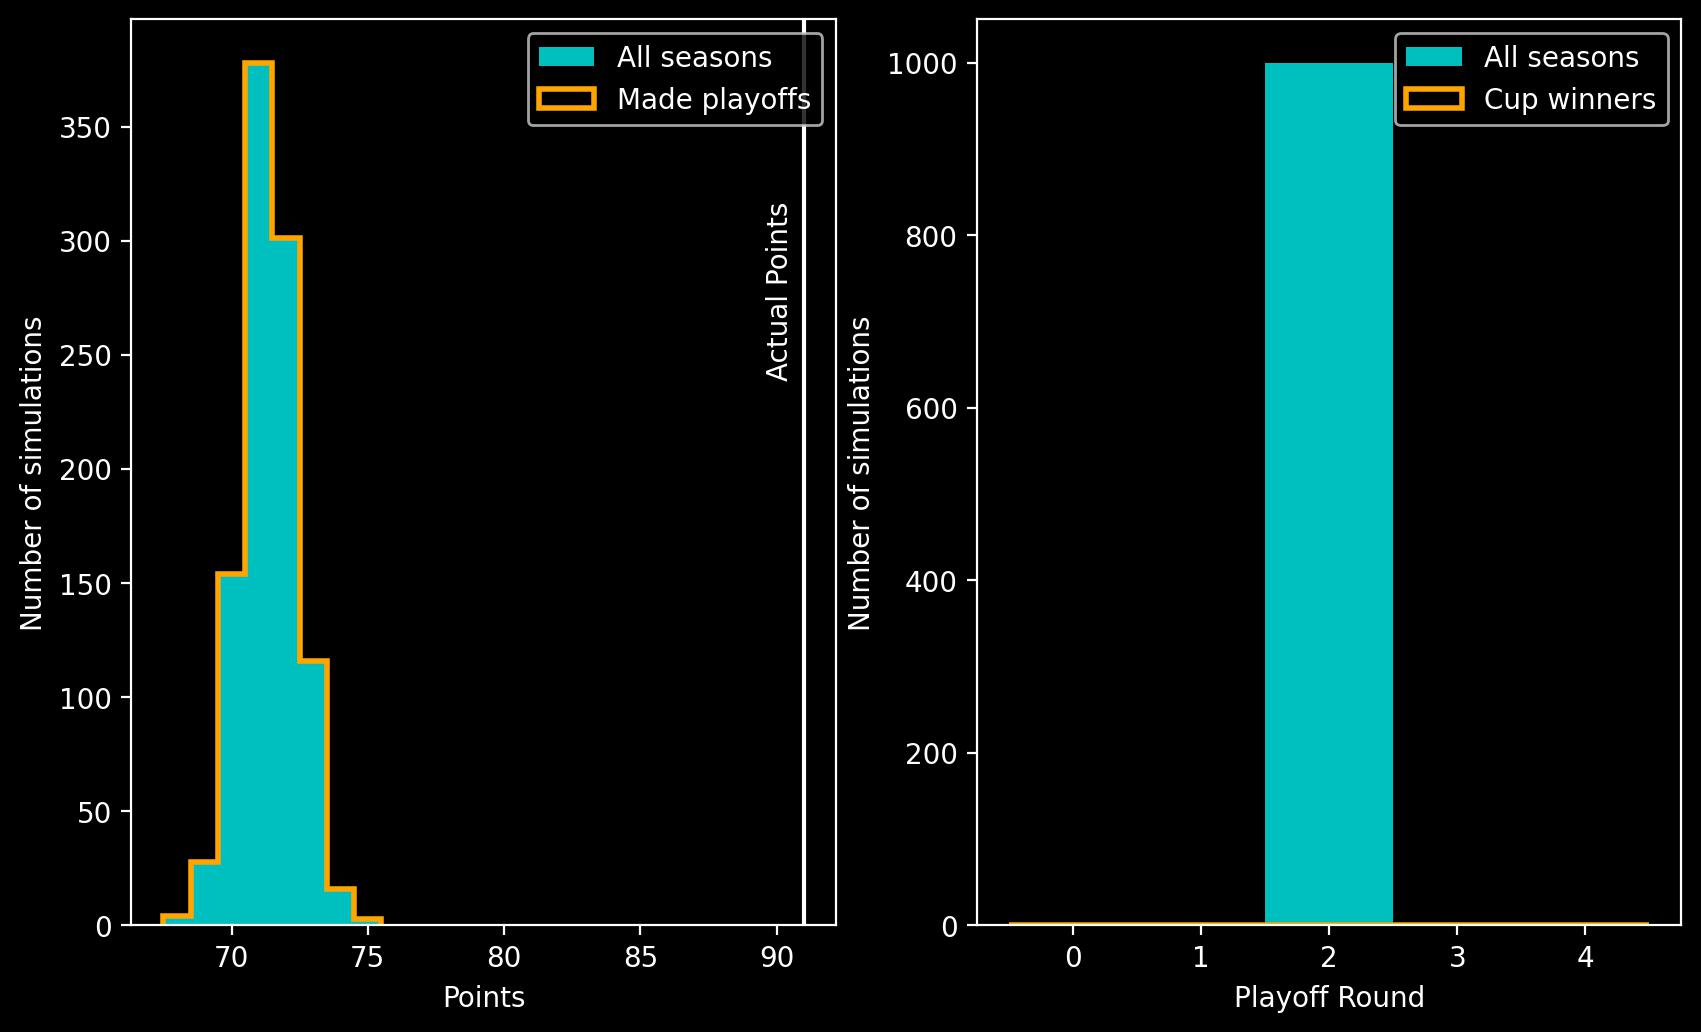 Two panel plot showing histograms. Left panel shows a histogram of points on the x-axis against number of simulations on the y-axis, the peak is at 71 points. Right panel shows playoff round on the x-axis against number of simulations on the y-axis. The largest bar is at playoff round 2.